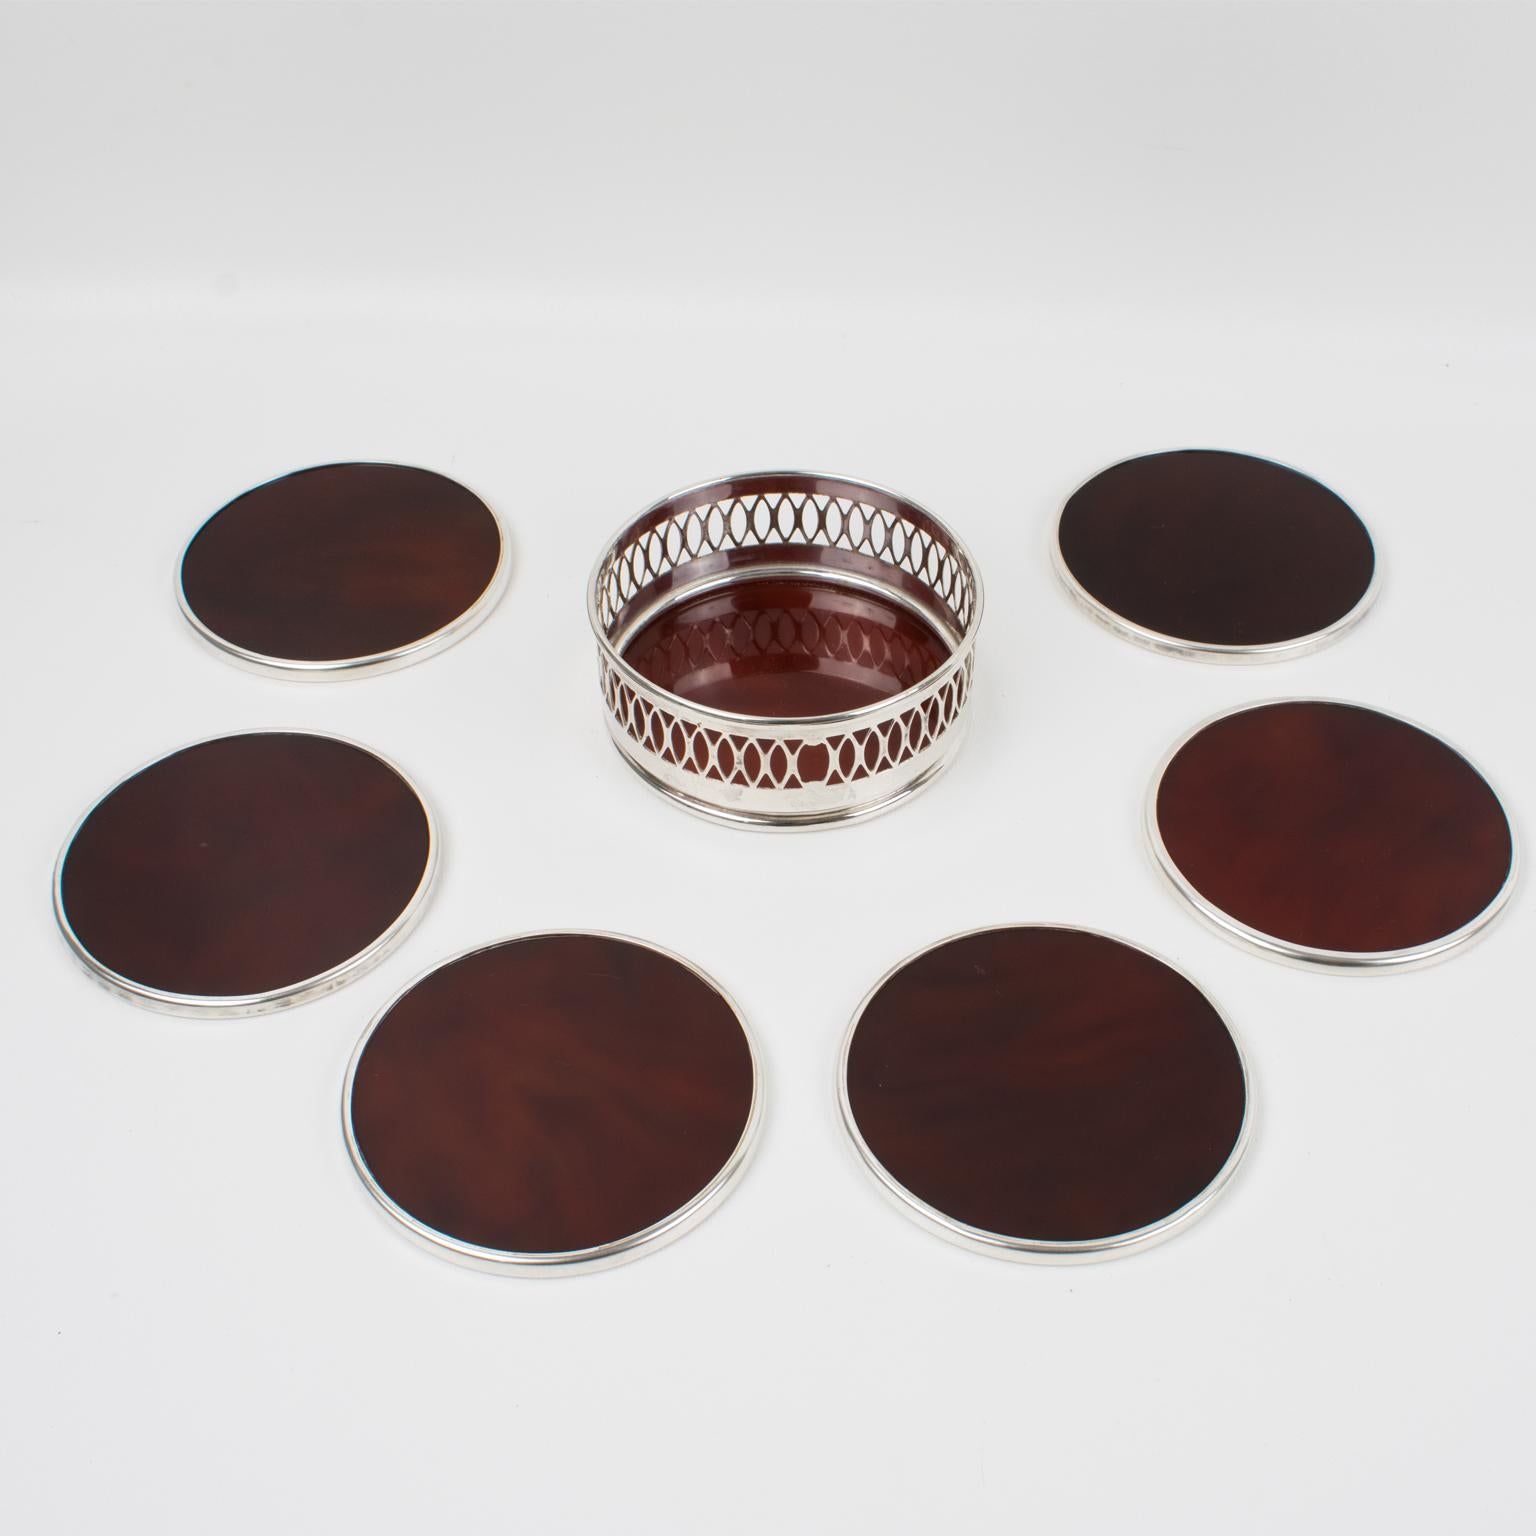 Lovely 1970s modernist barware set of six coasters with holder, design attributed to Willy Rizzo. Rounded shape with tortoiseshell (tortoise) translucent Lucite and chromed metal framing, note the framing is different from one side to the other.